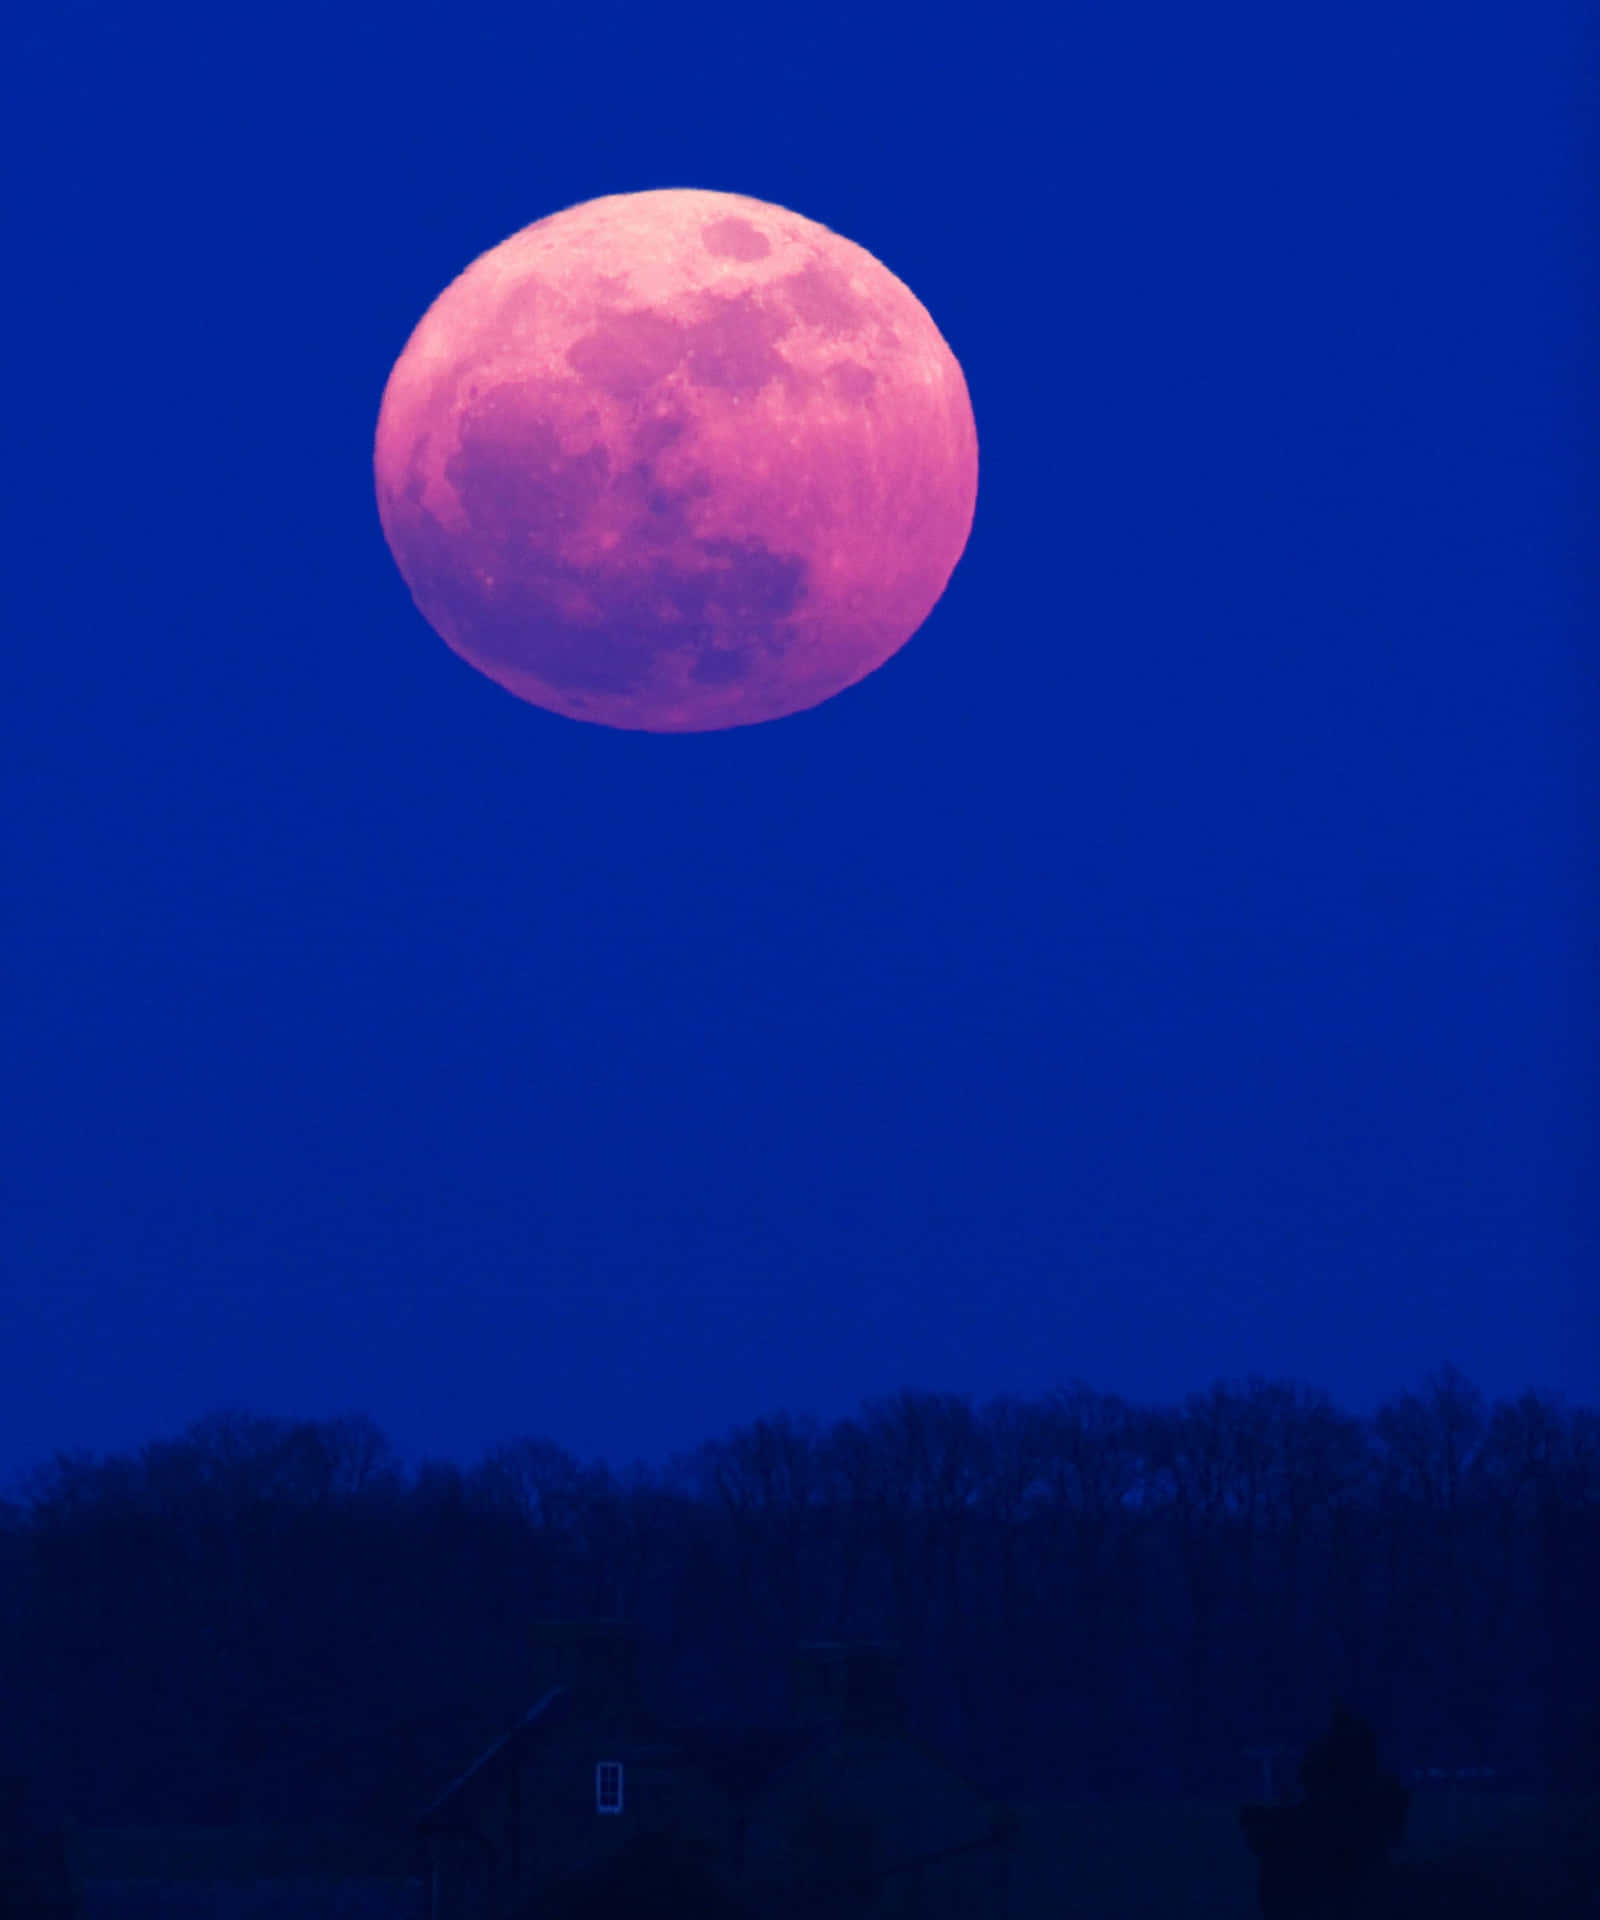 The mysterious beauty of the Pink Moon